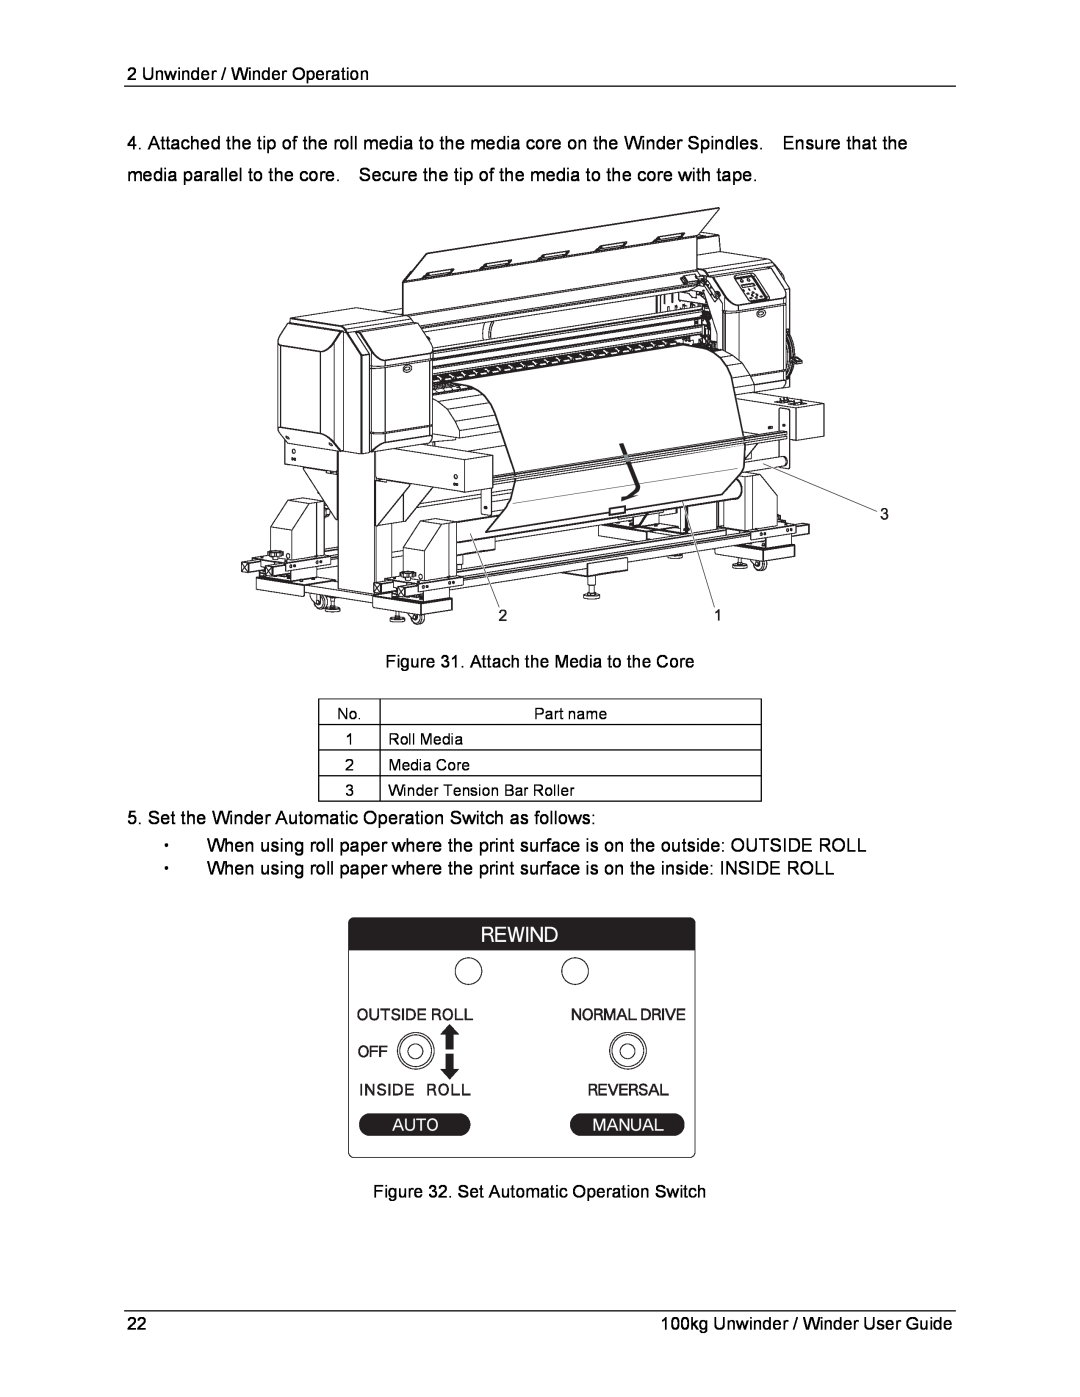 Xerox 8264E, 8254E manual Unwinder / Winder Operation, Attach the Media to the Core, Set Automatic Operation Switch 